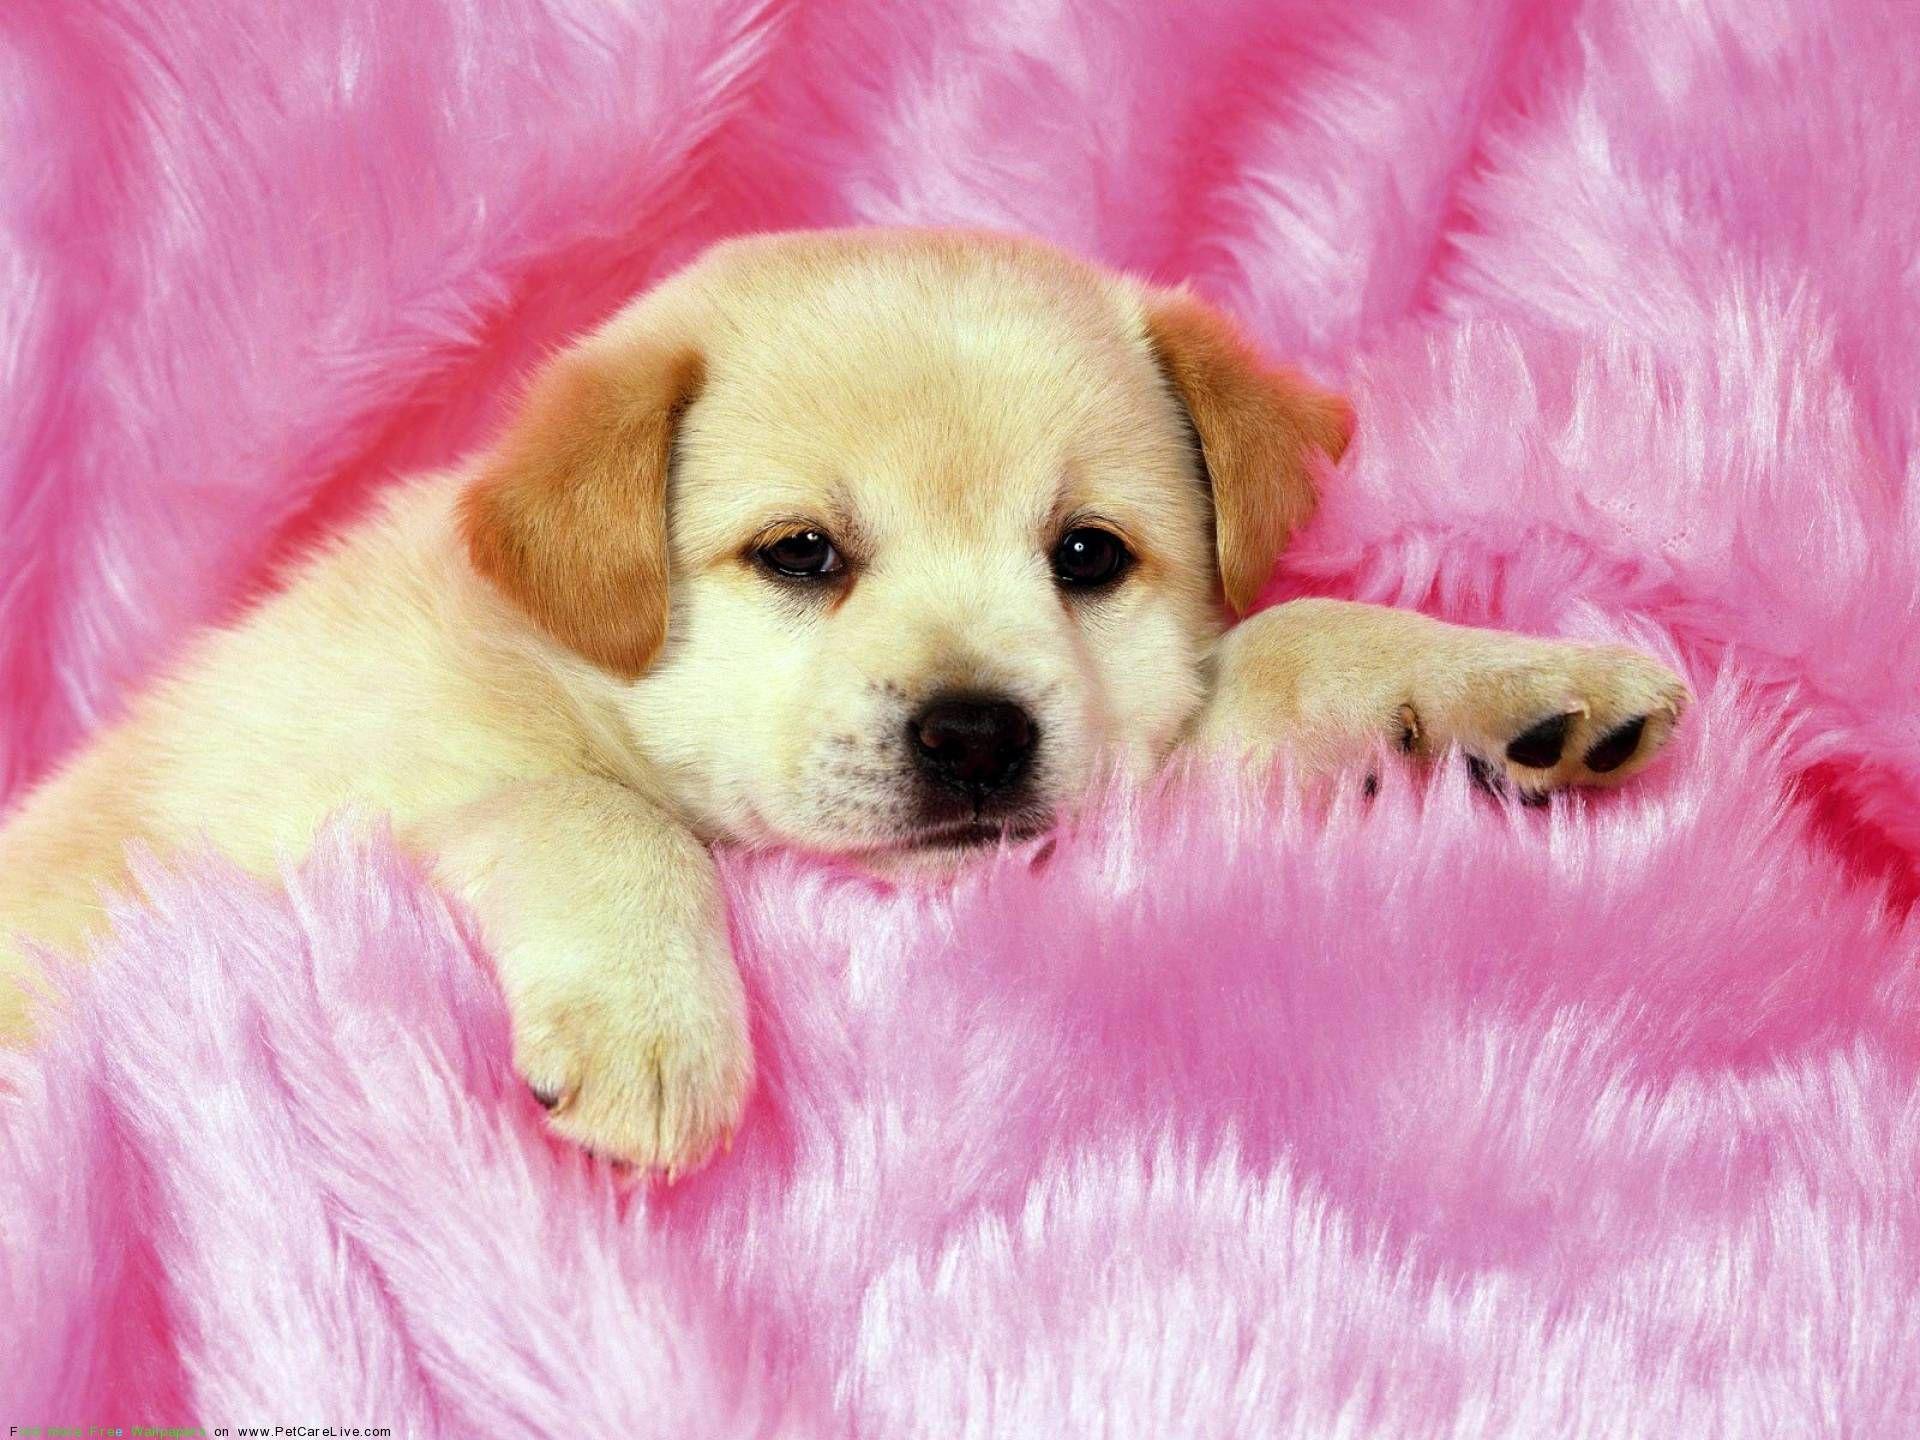 Cute Dogs And Puppies Wallpaper. Cute dog